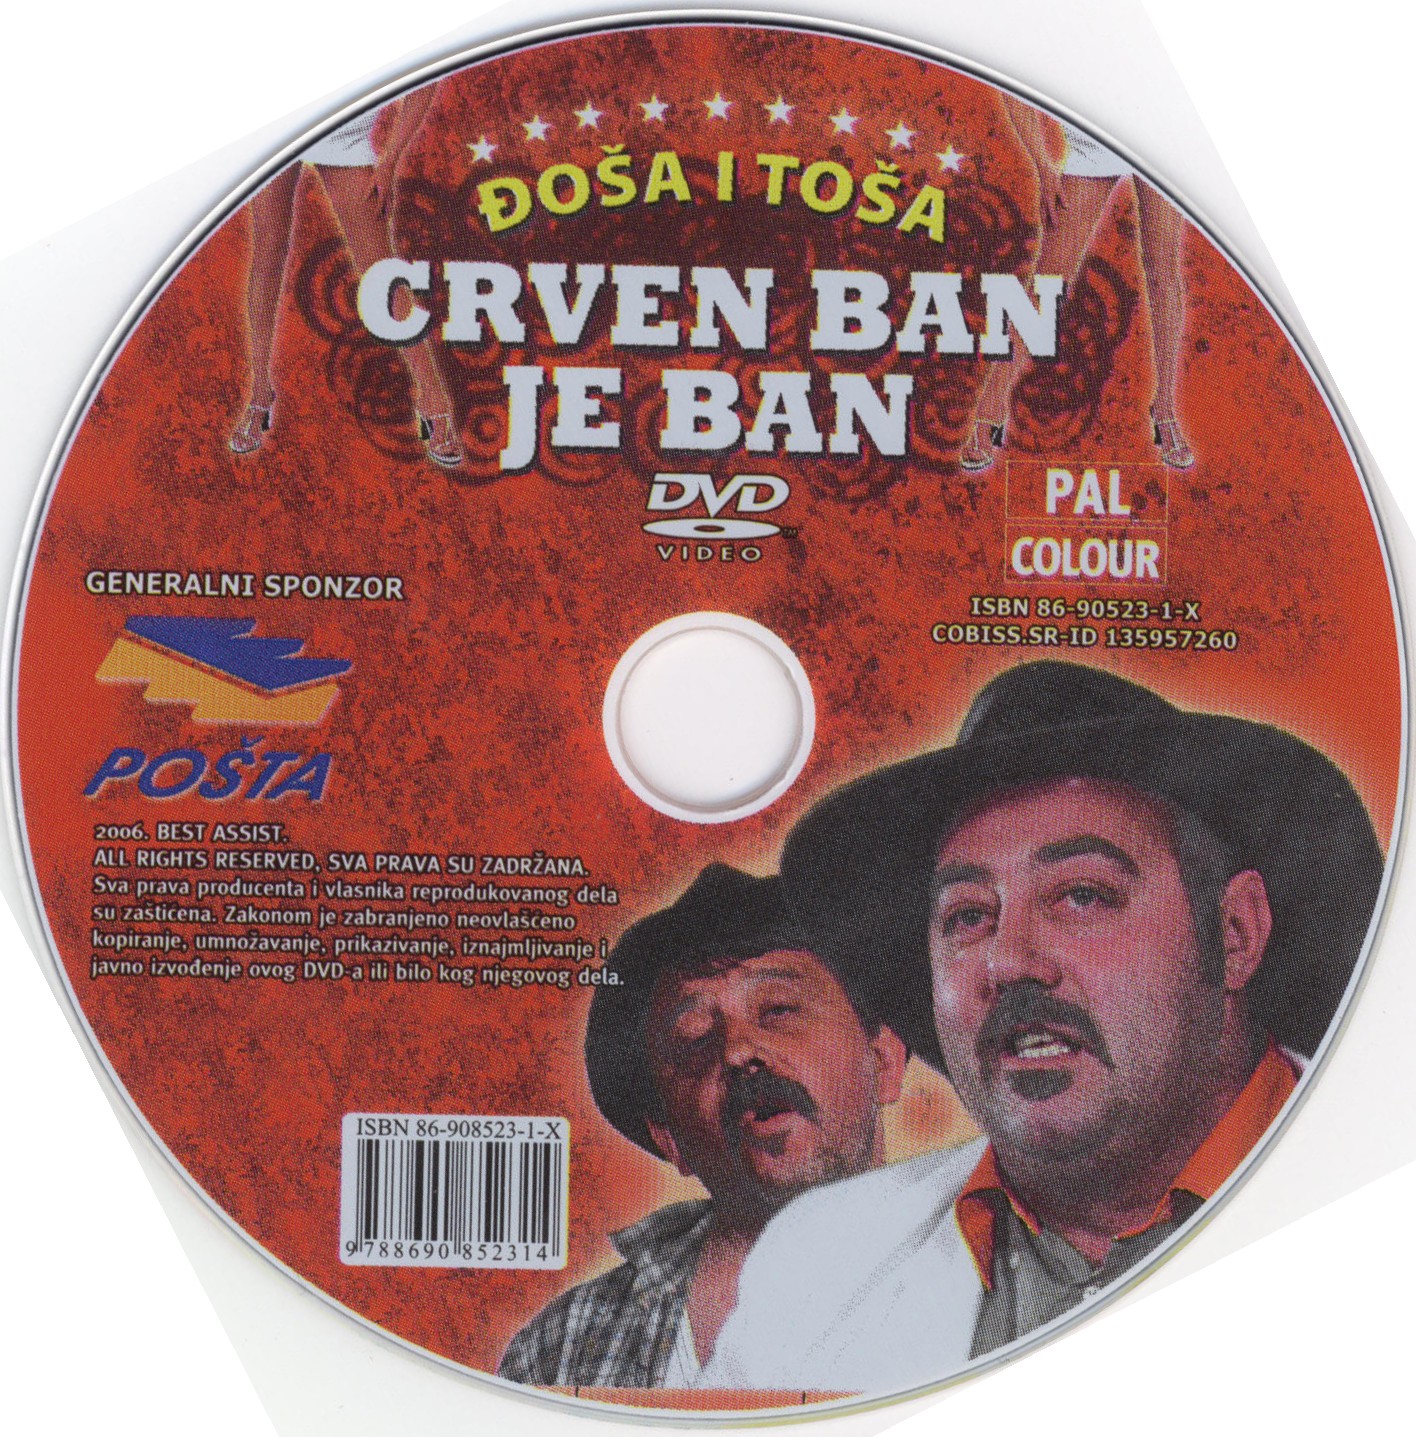 Click to view full size image -  DVD Cover - C - DVD - CRVEN BAN JE BAN - CD - DVD - CRVEN BAN JE BAN - CD.jpg